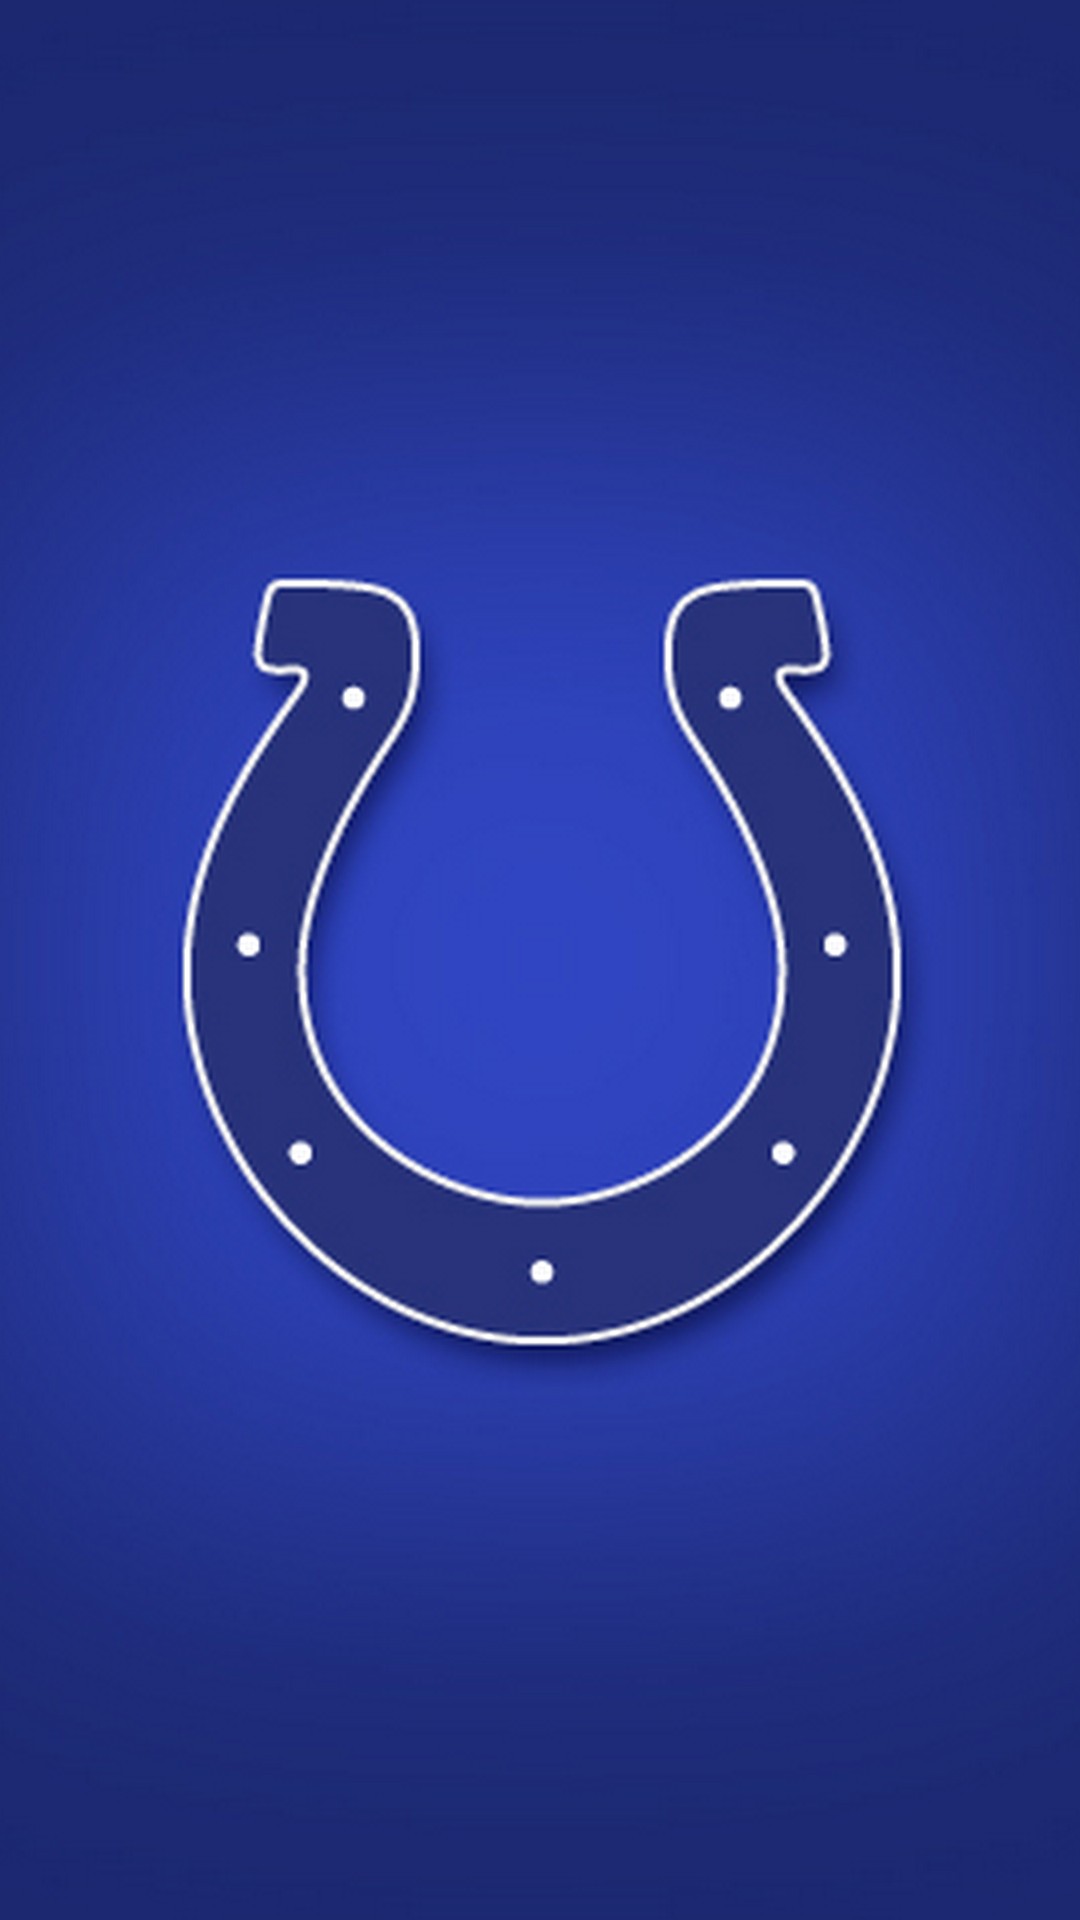 Indianapolis Colts iPhone 7 Plus Wallpaper With high-resolution 1080X1920 pixel. You can use this wallpaper for your Mac or Windows Desktop Background, iPhone, Android or Tablet and another Smartphone device